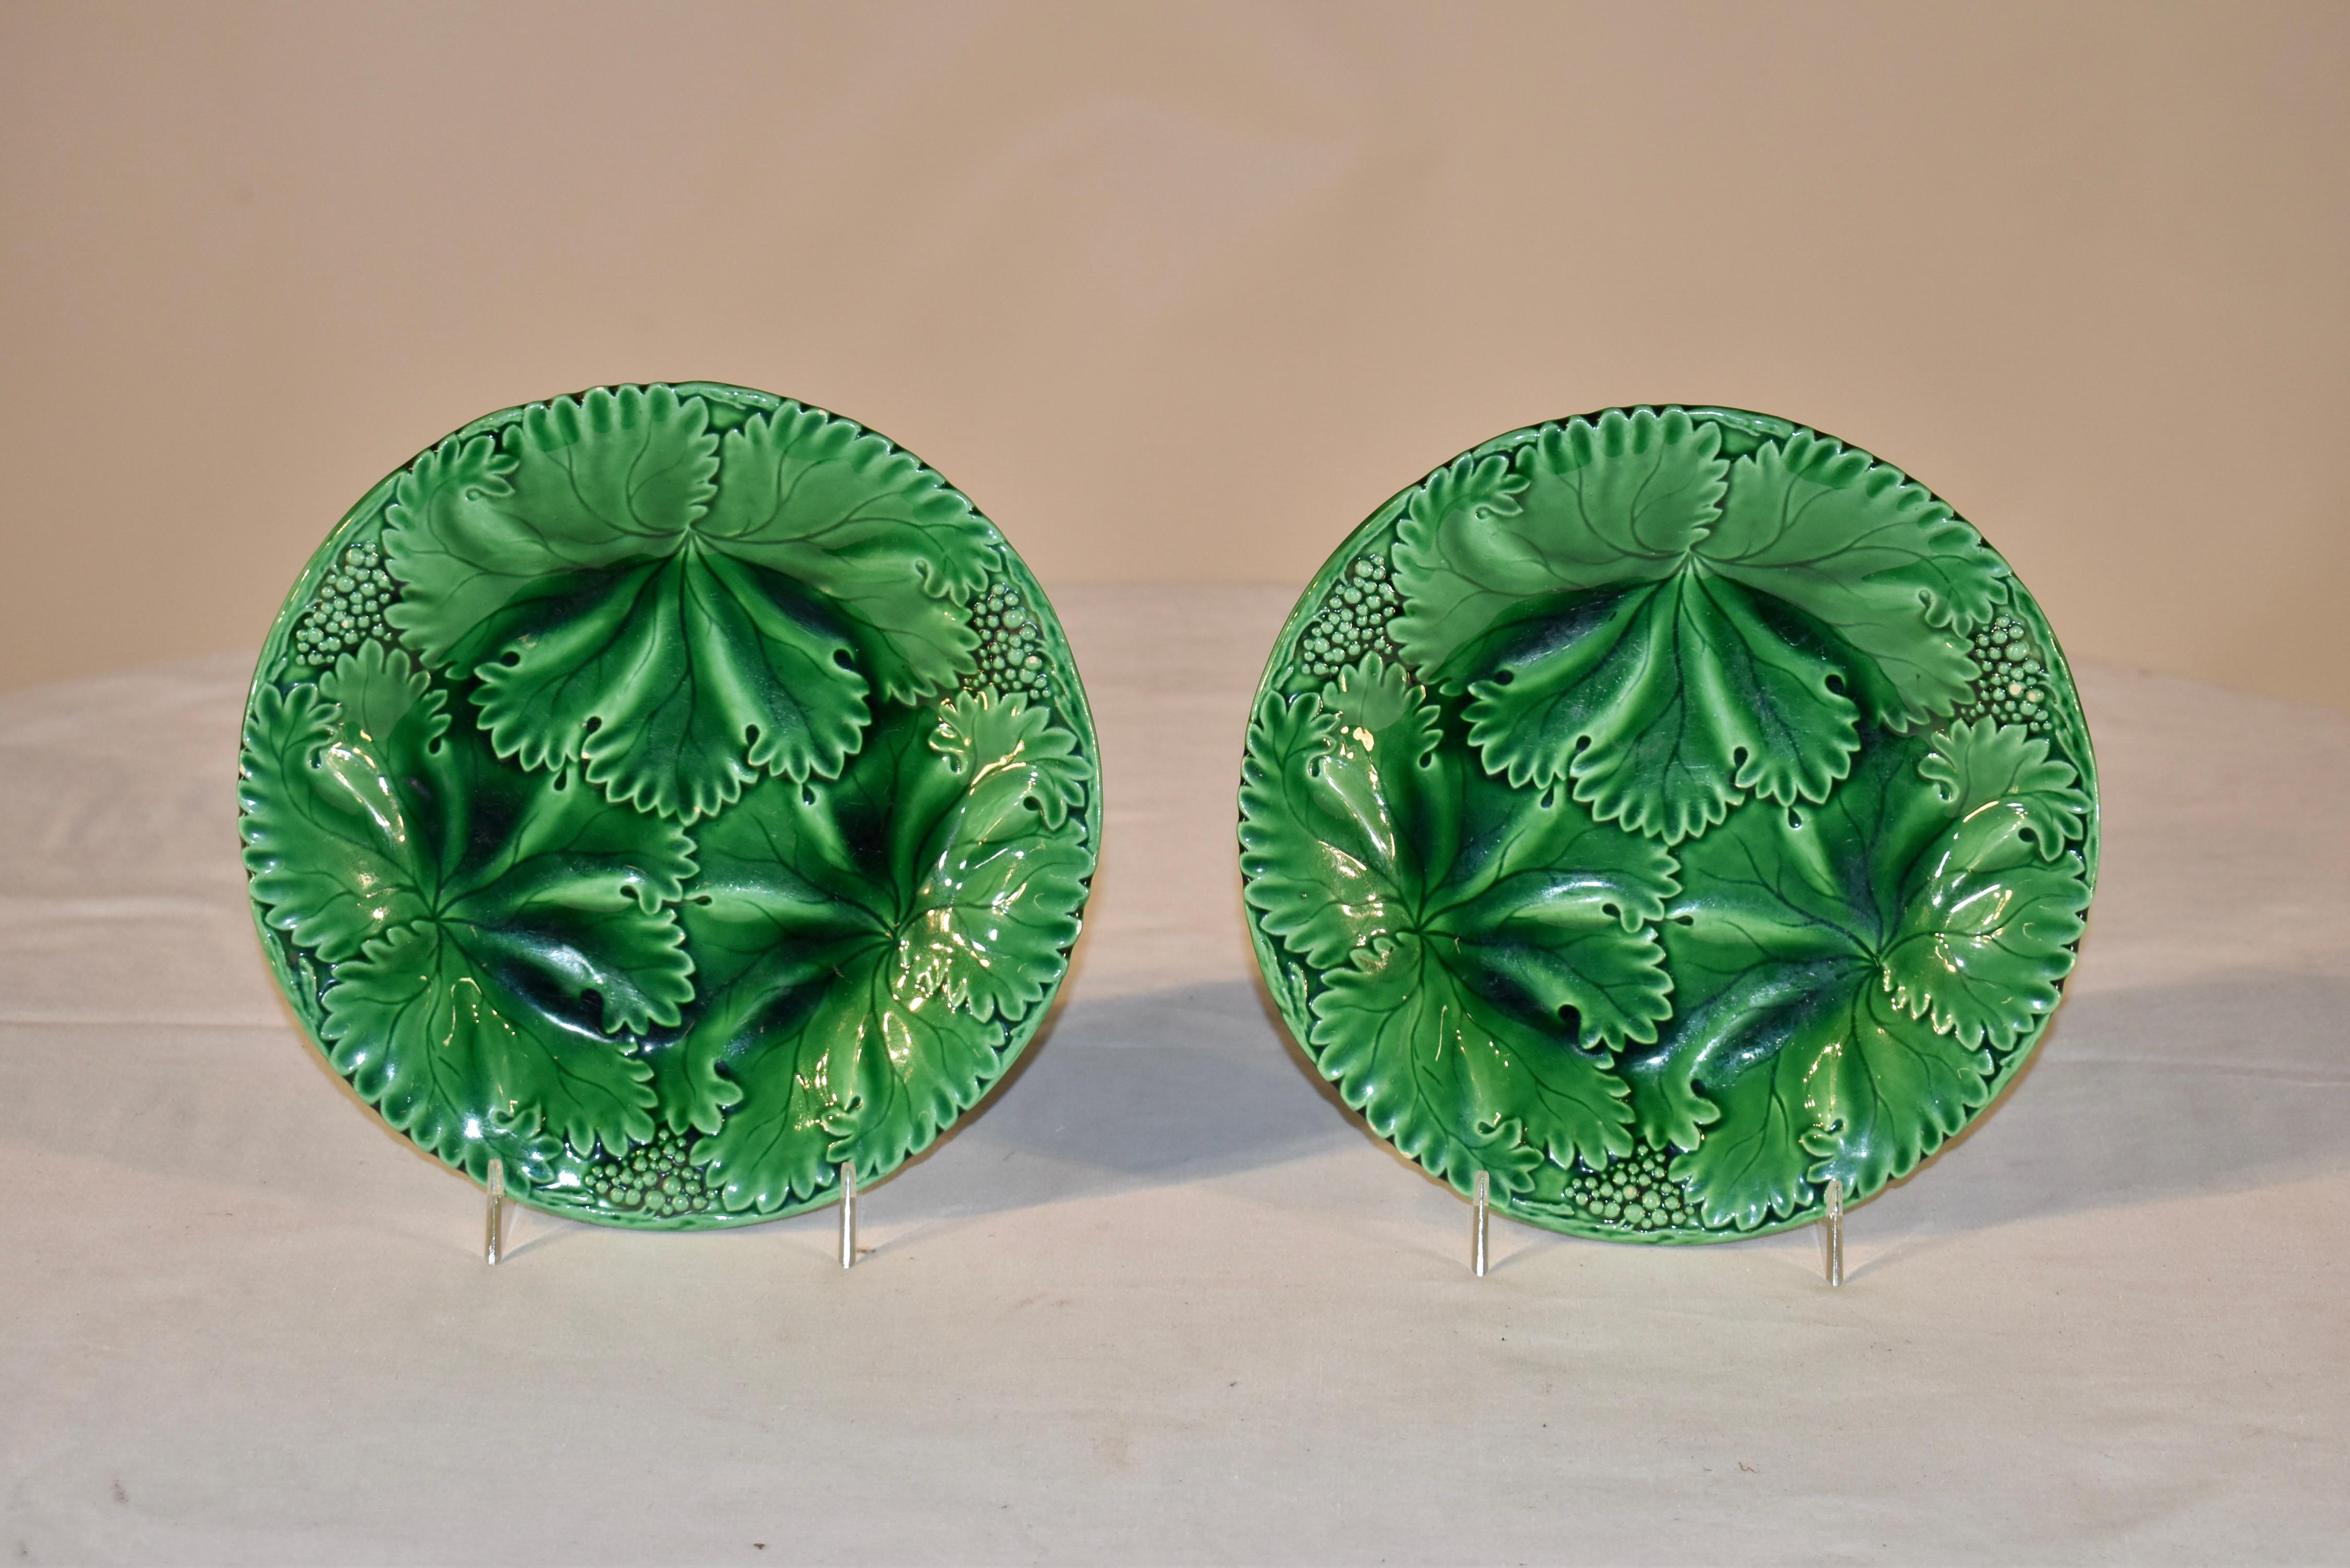 Pair of 19th century majolica plates stamped with the makers mark Schramberg on the back. They are wonderfully colored and are in the design of three overlapping leaves , with berries and vines separating them around the rim of the plate.